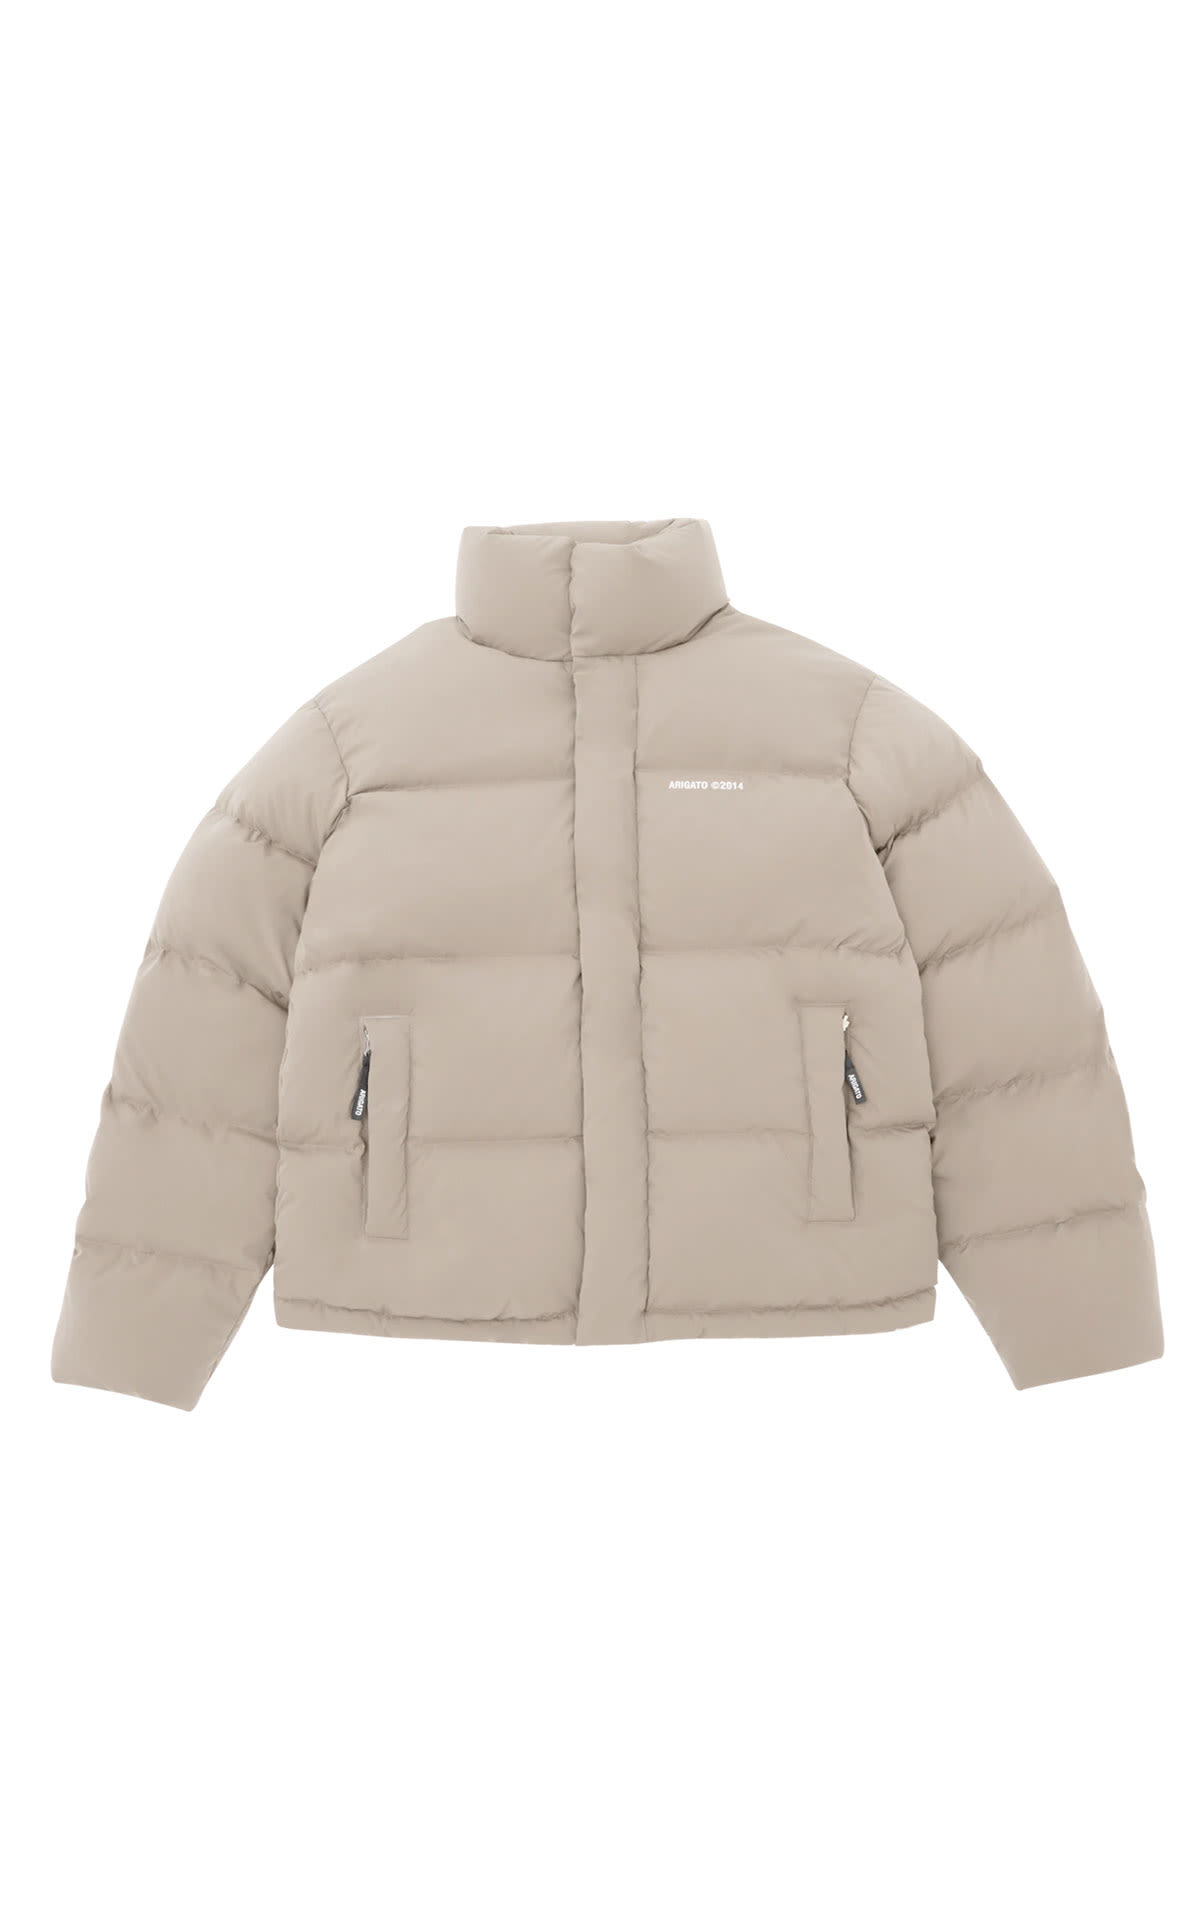 Axel Arigato Halo down jacket from Bicester Village